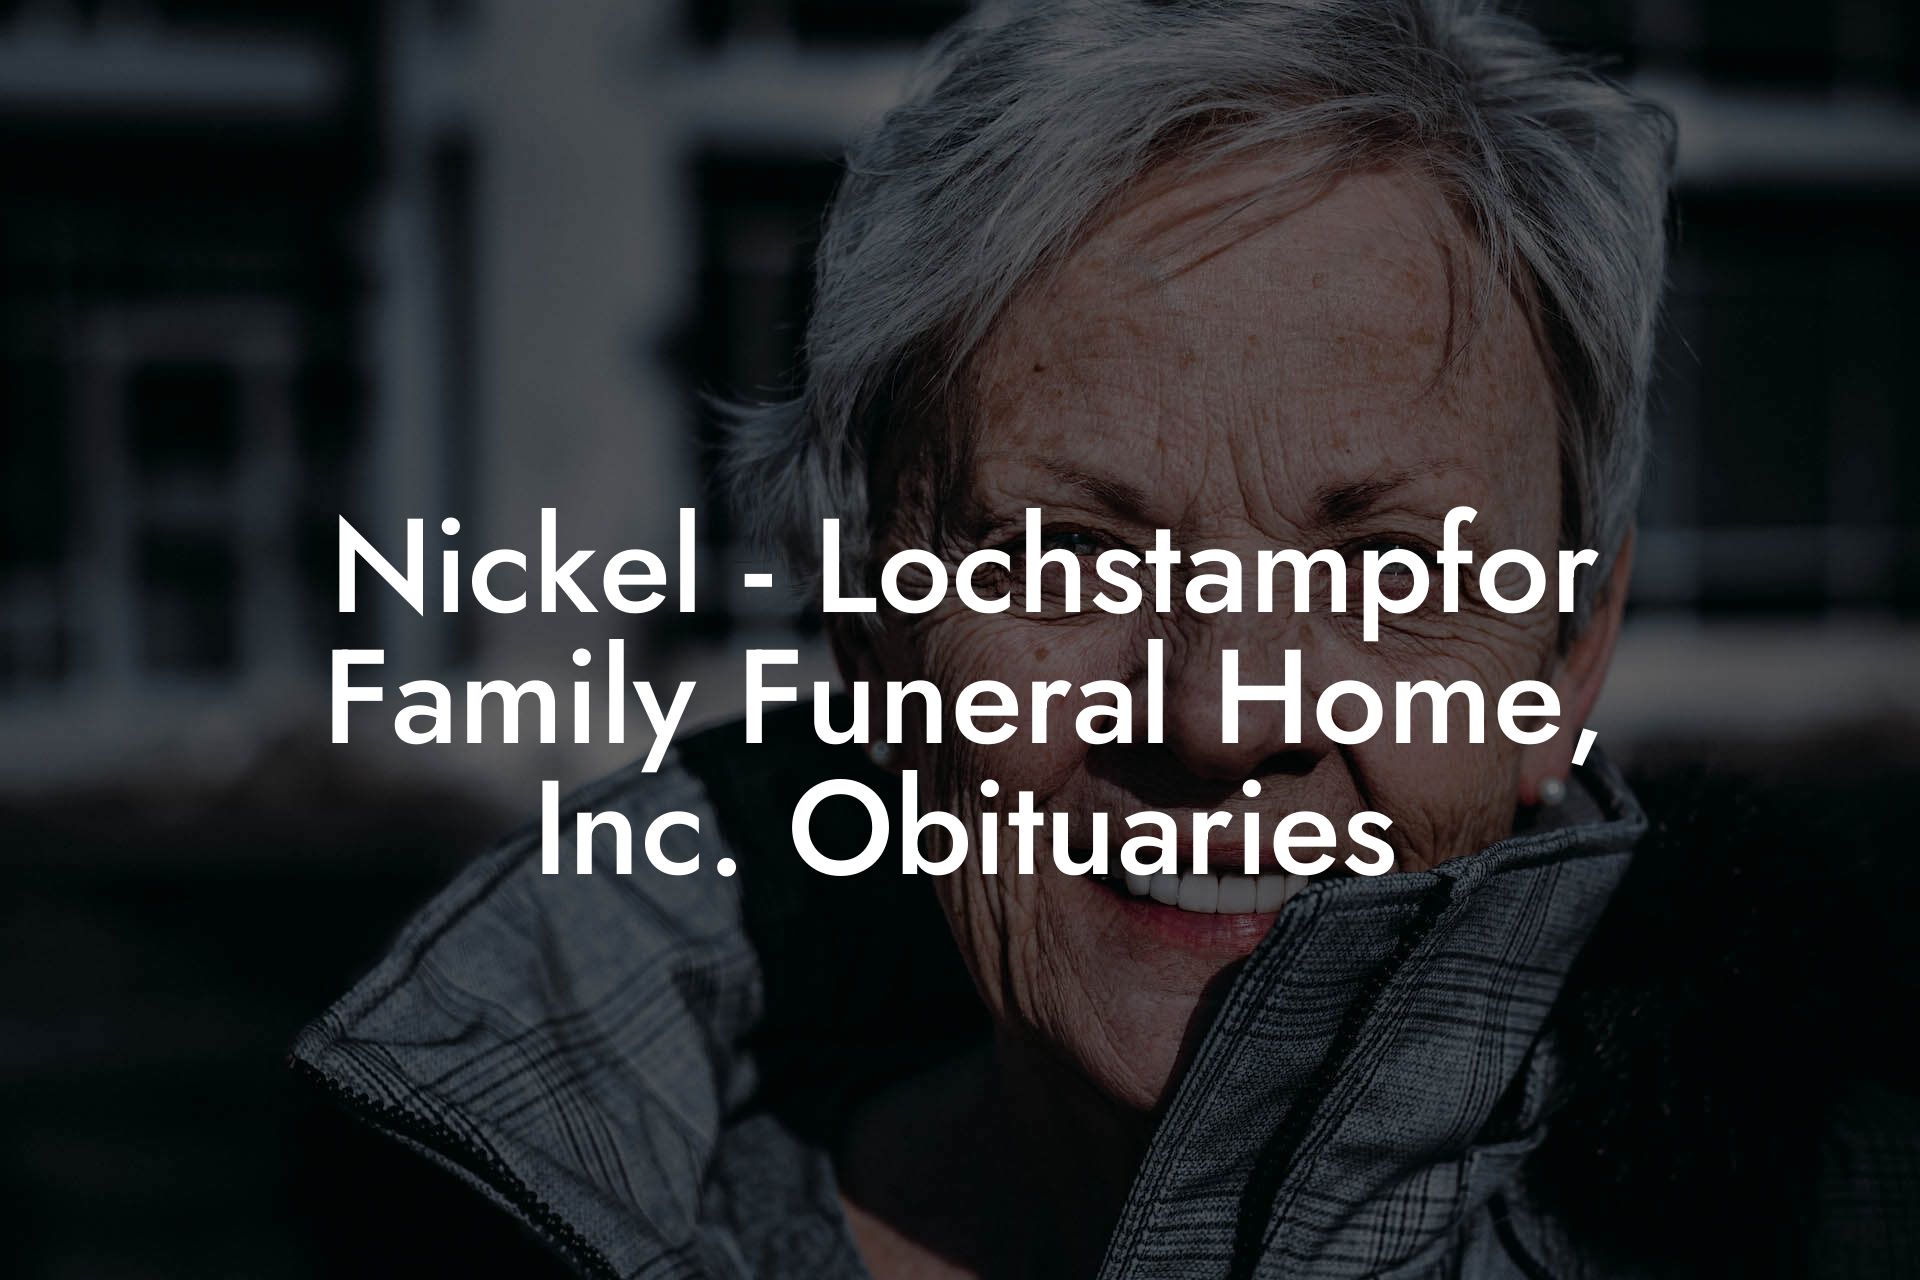 Nickel - Lochstampfor Family Funeral Home, Inc. Obituaries